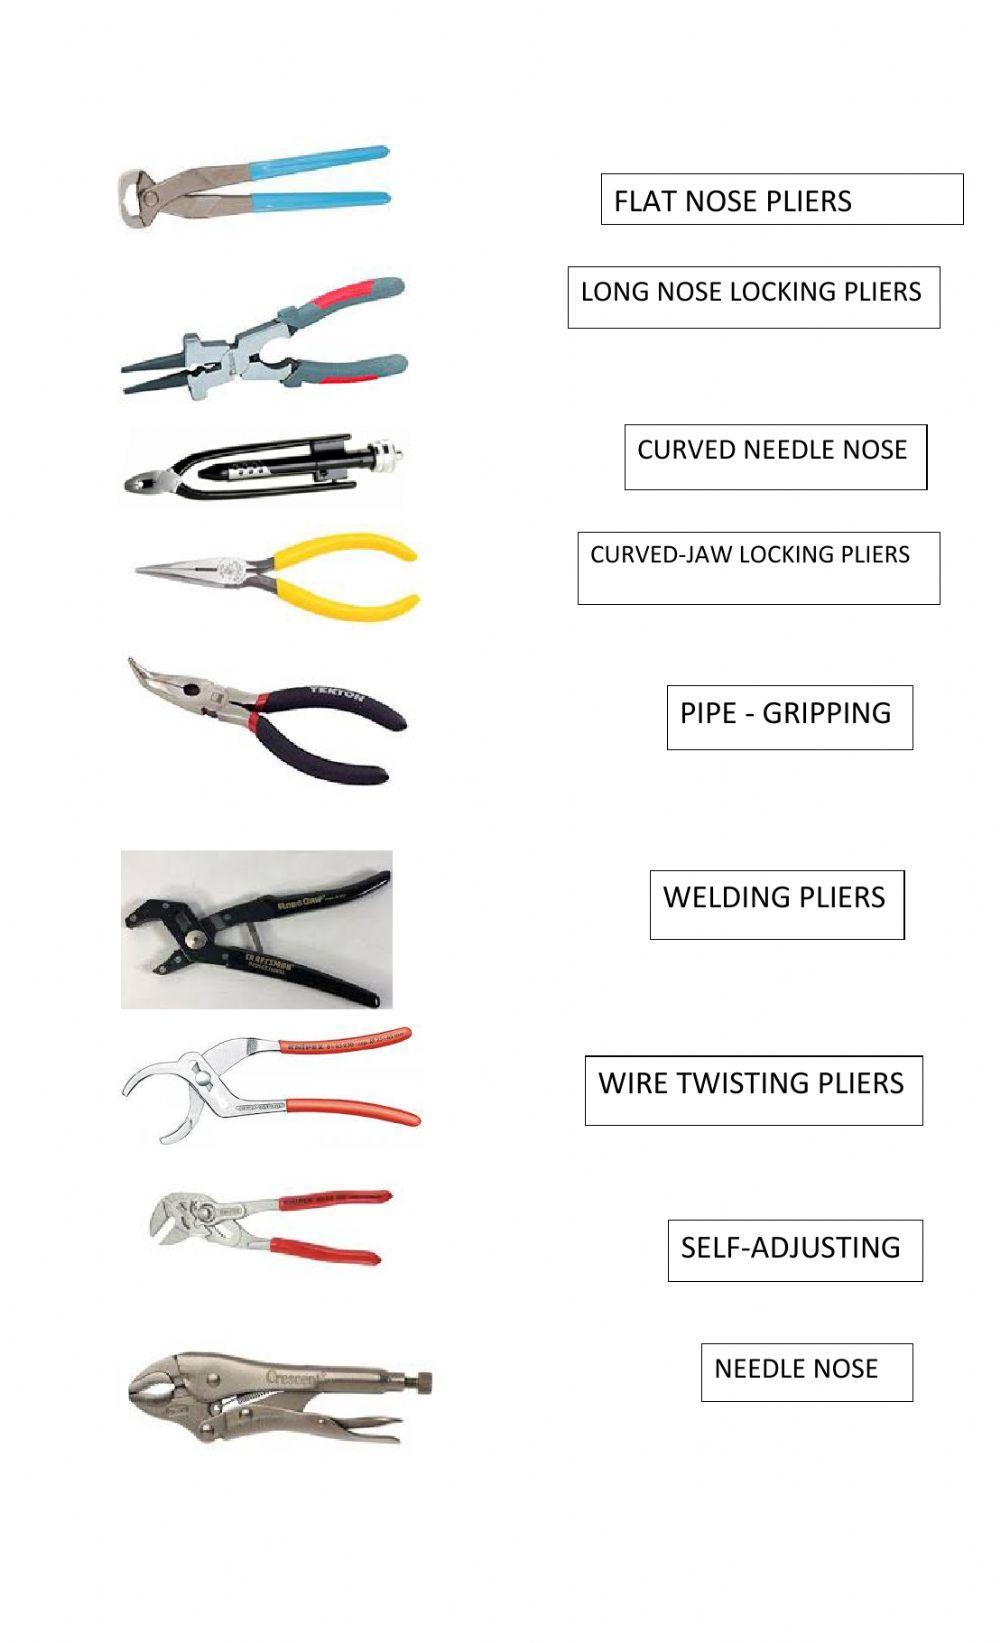 Pliers matching